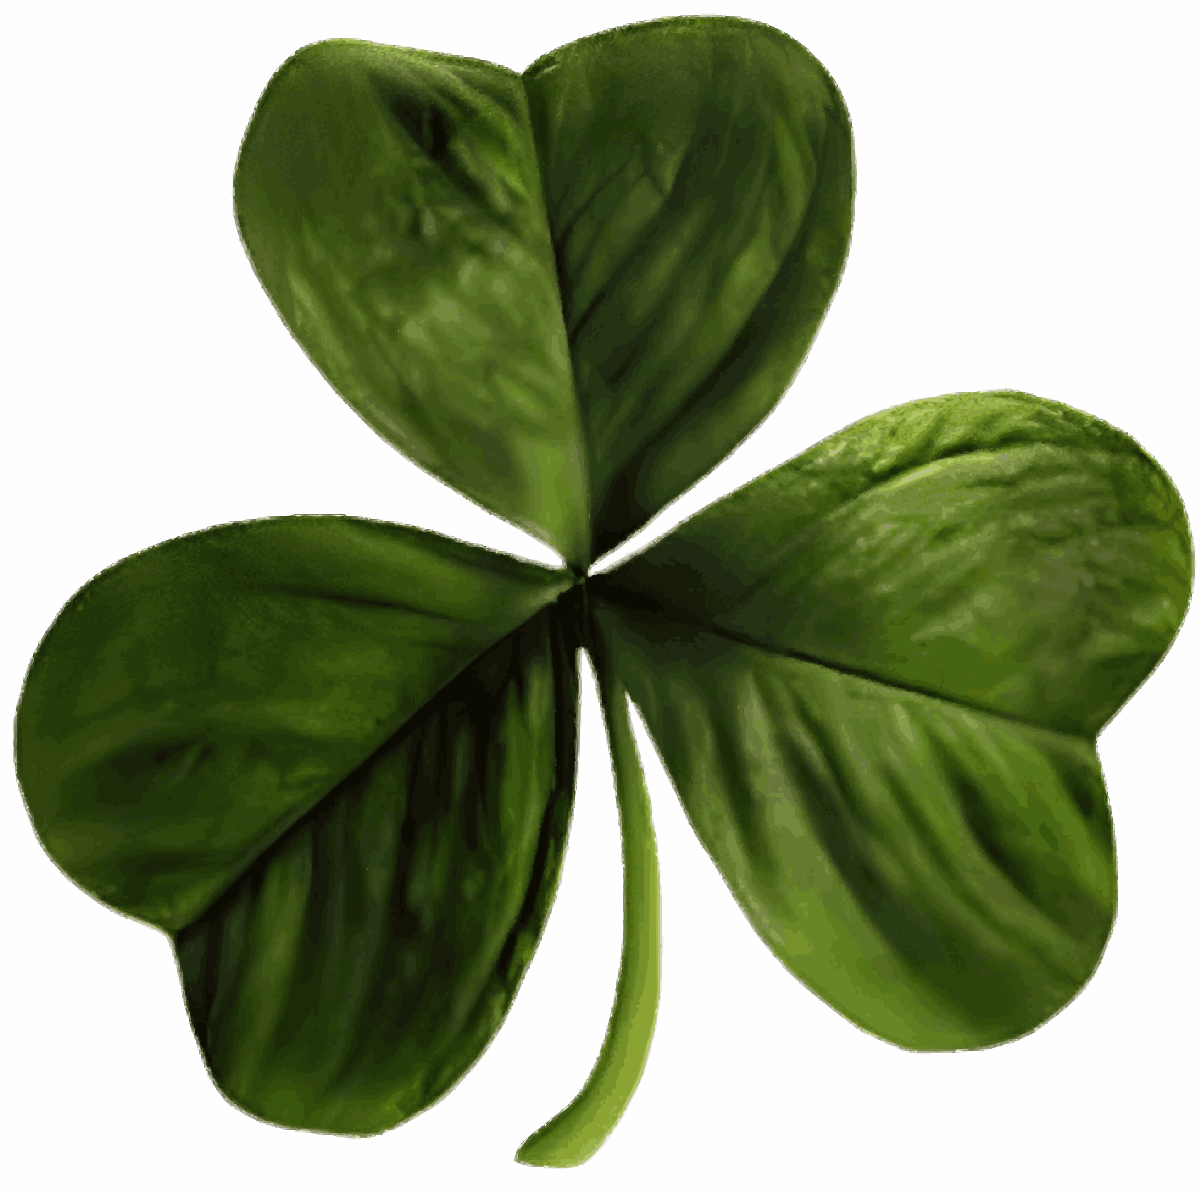 St Patrick's Day: The difference between a shamrock and a four